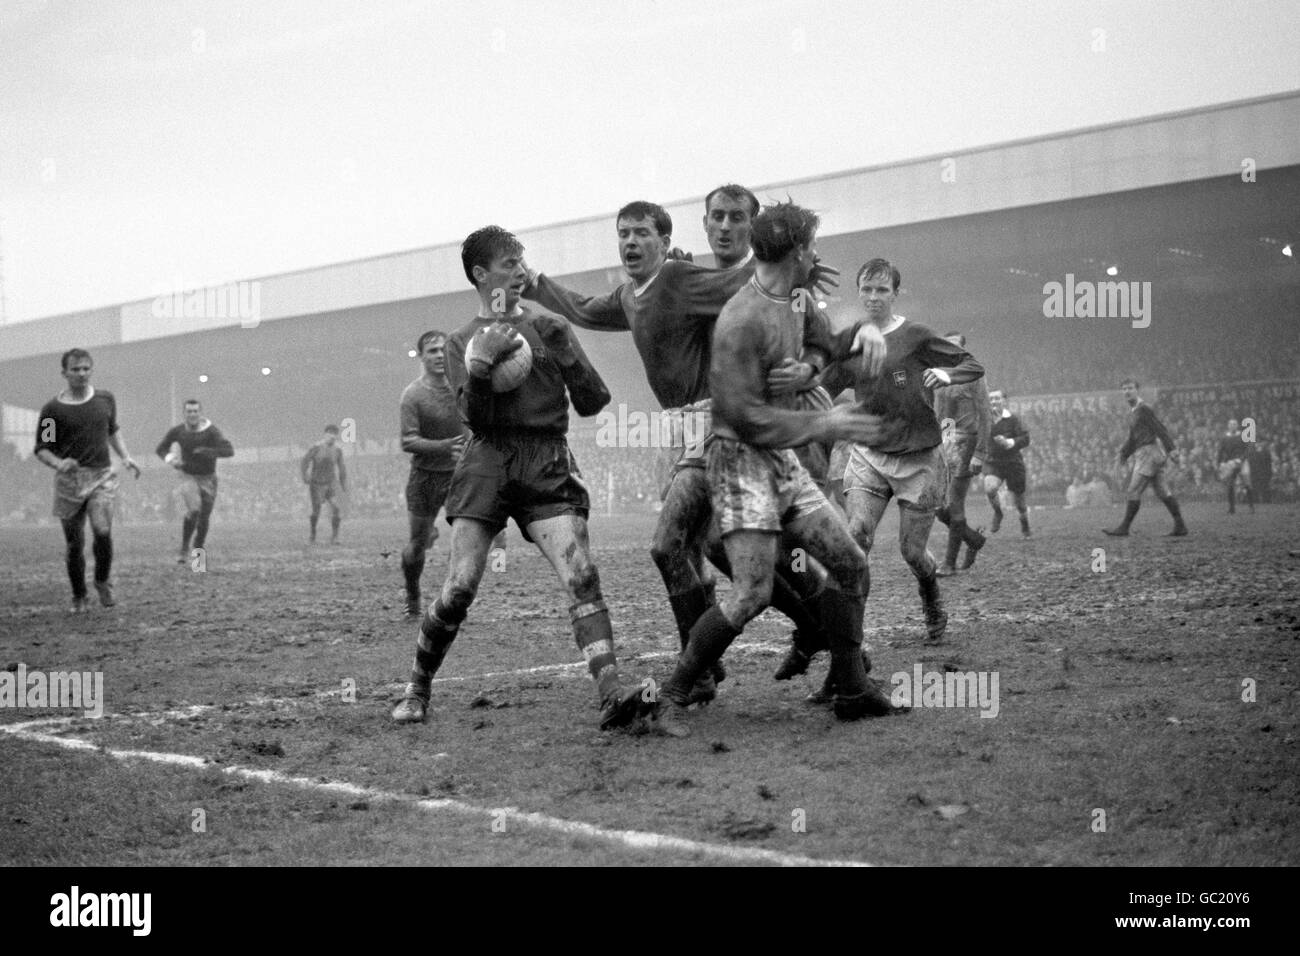 Alan Kelly, the Preston goalkeeper (holding ball, left) having been charged by Eddie Thomas, the Swansea centre forward (right, foreground). The players in centre keeping the players apart are David Wilson and Alec Ashworth, both of Preston. In right background is Nobby Lawton, the Preston captain. Stock Photo